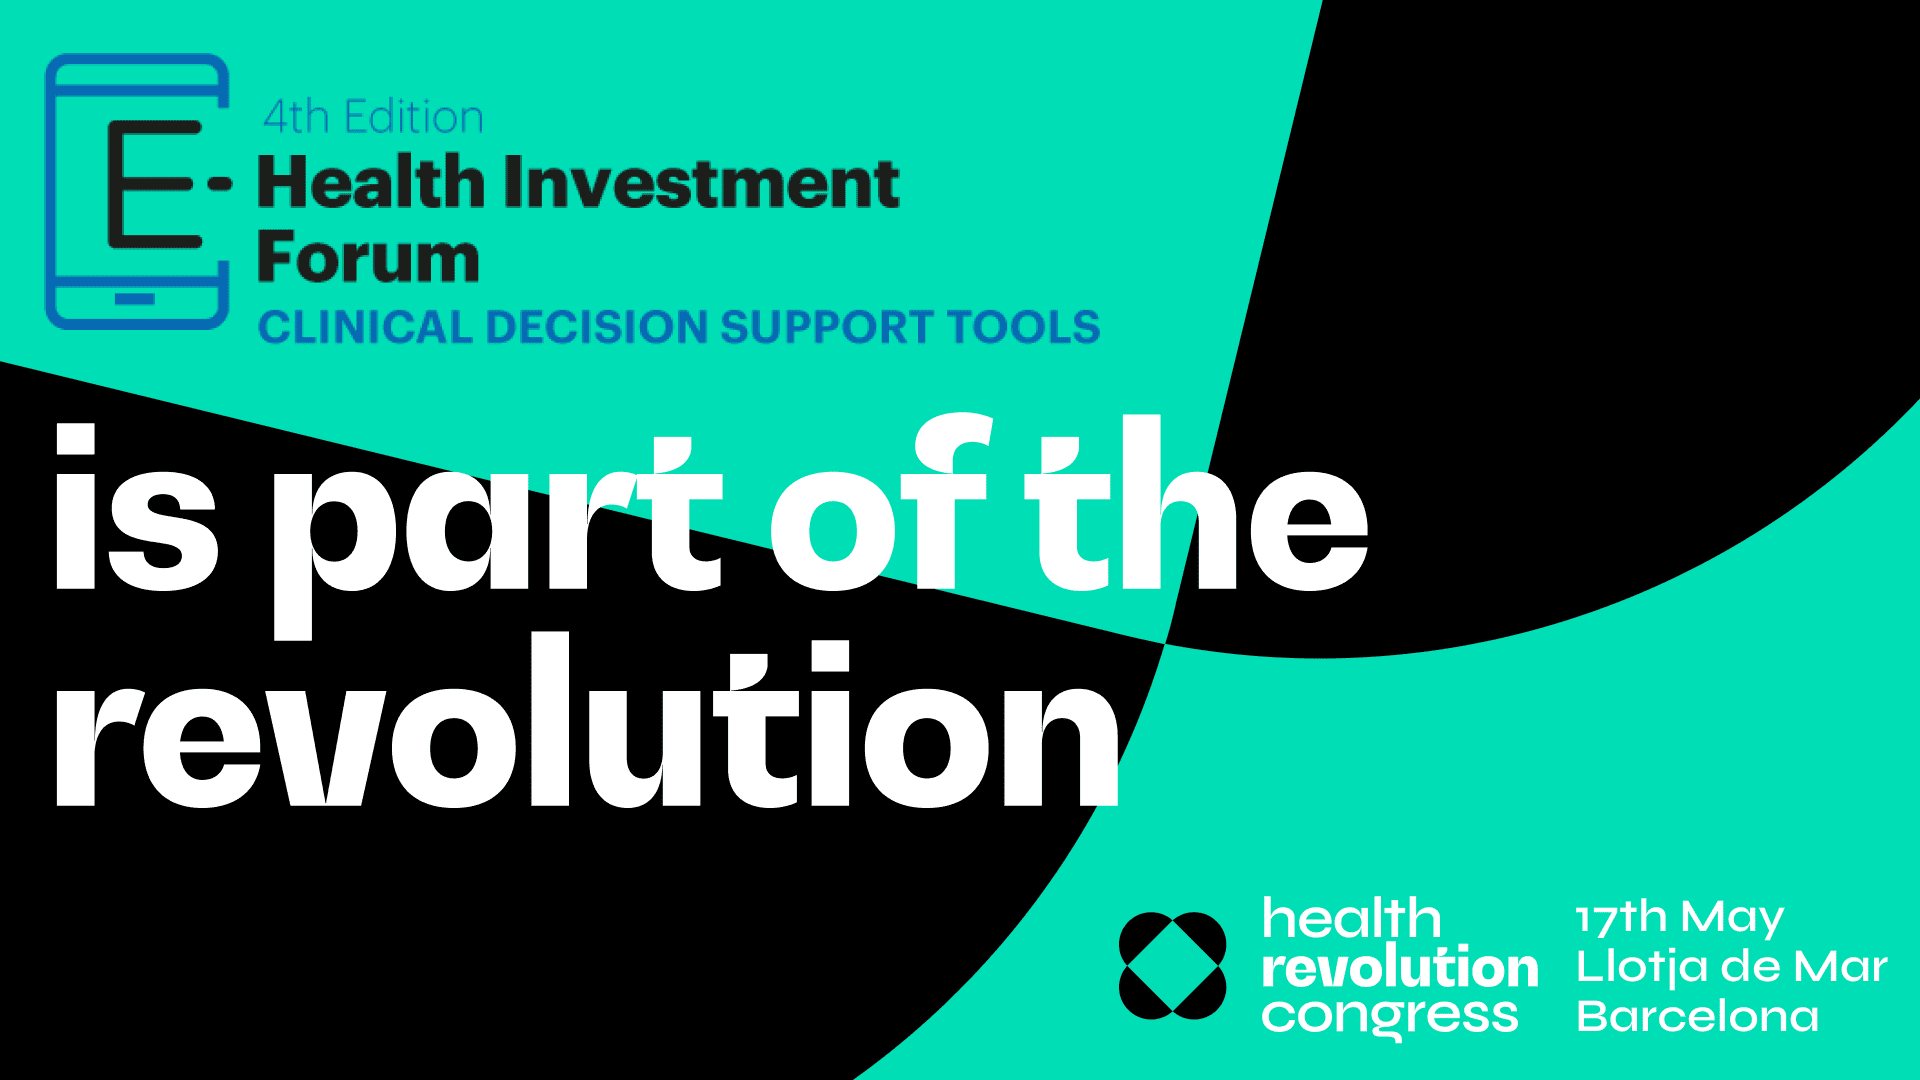 Apply for the e-Health Investment Forum at the Health Revolution Congress